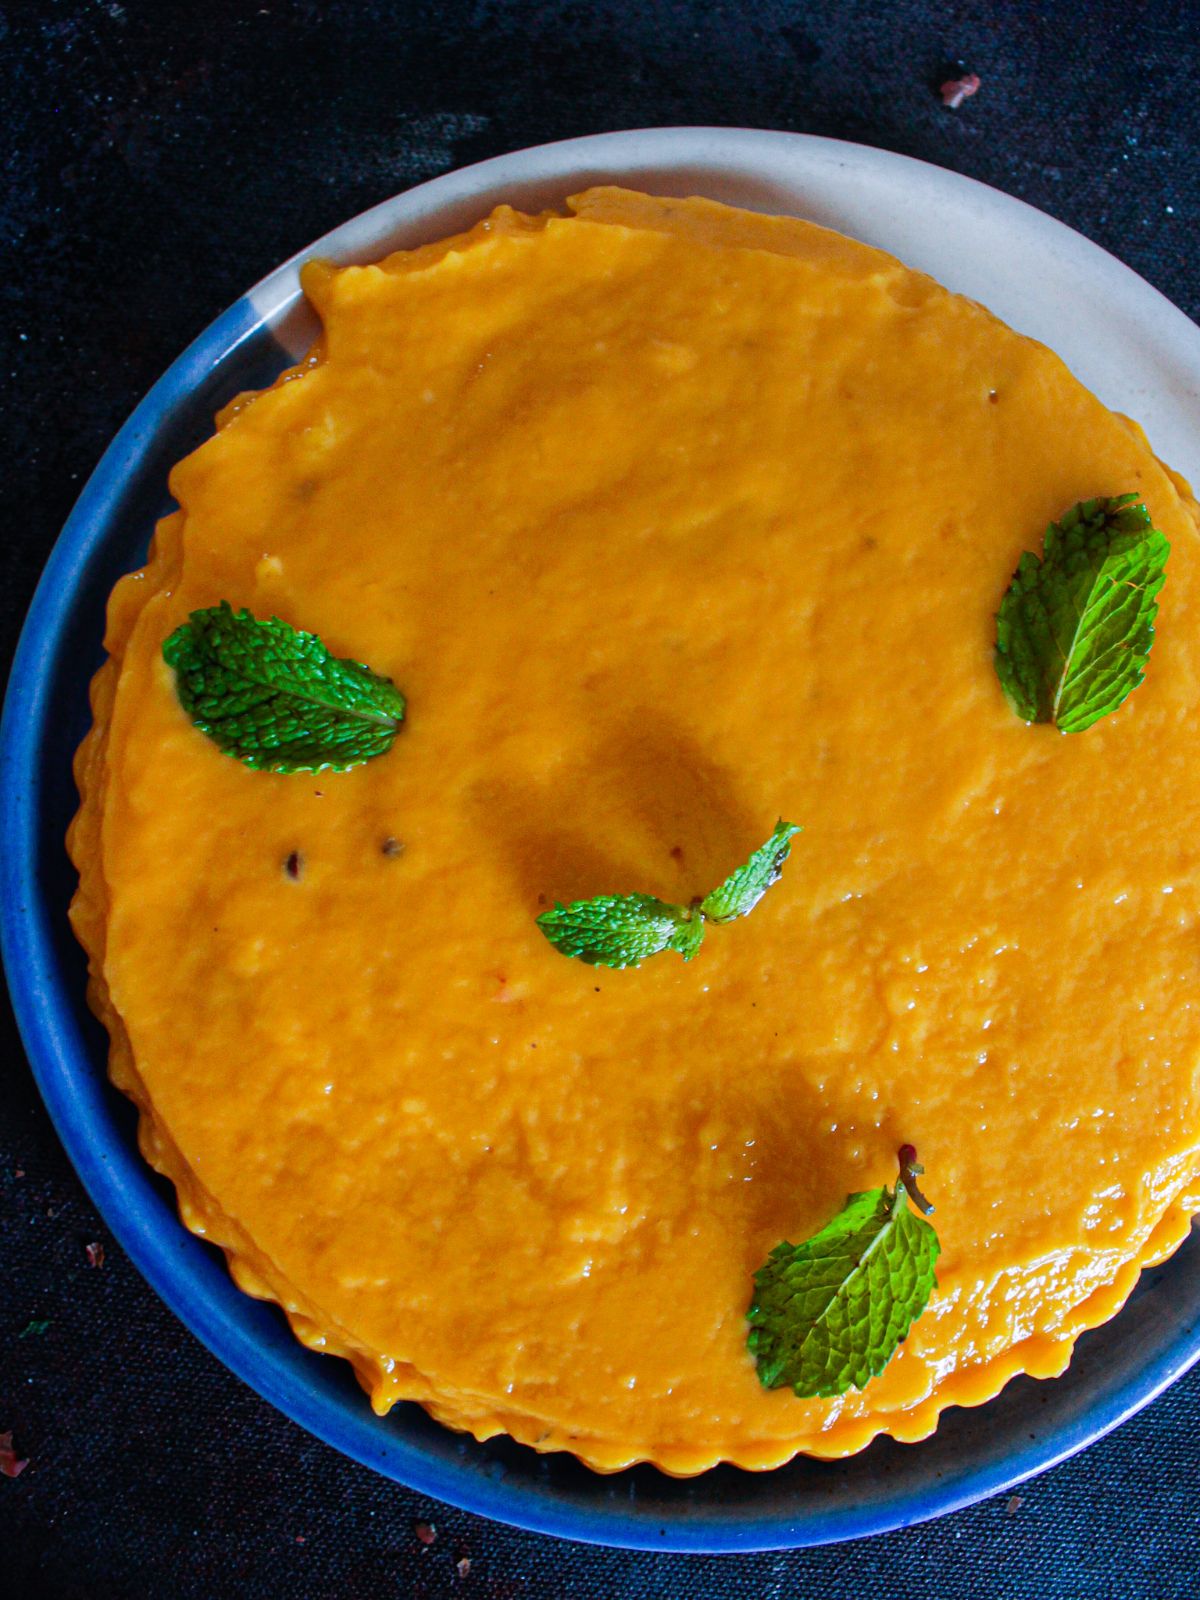 mango pudding on blue plate with mint leaves on top